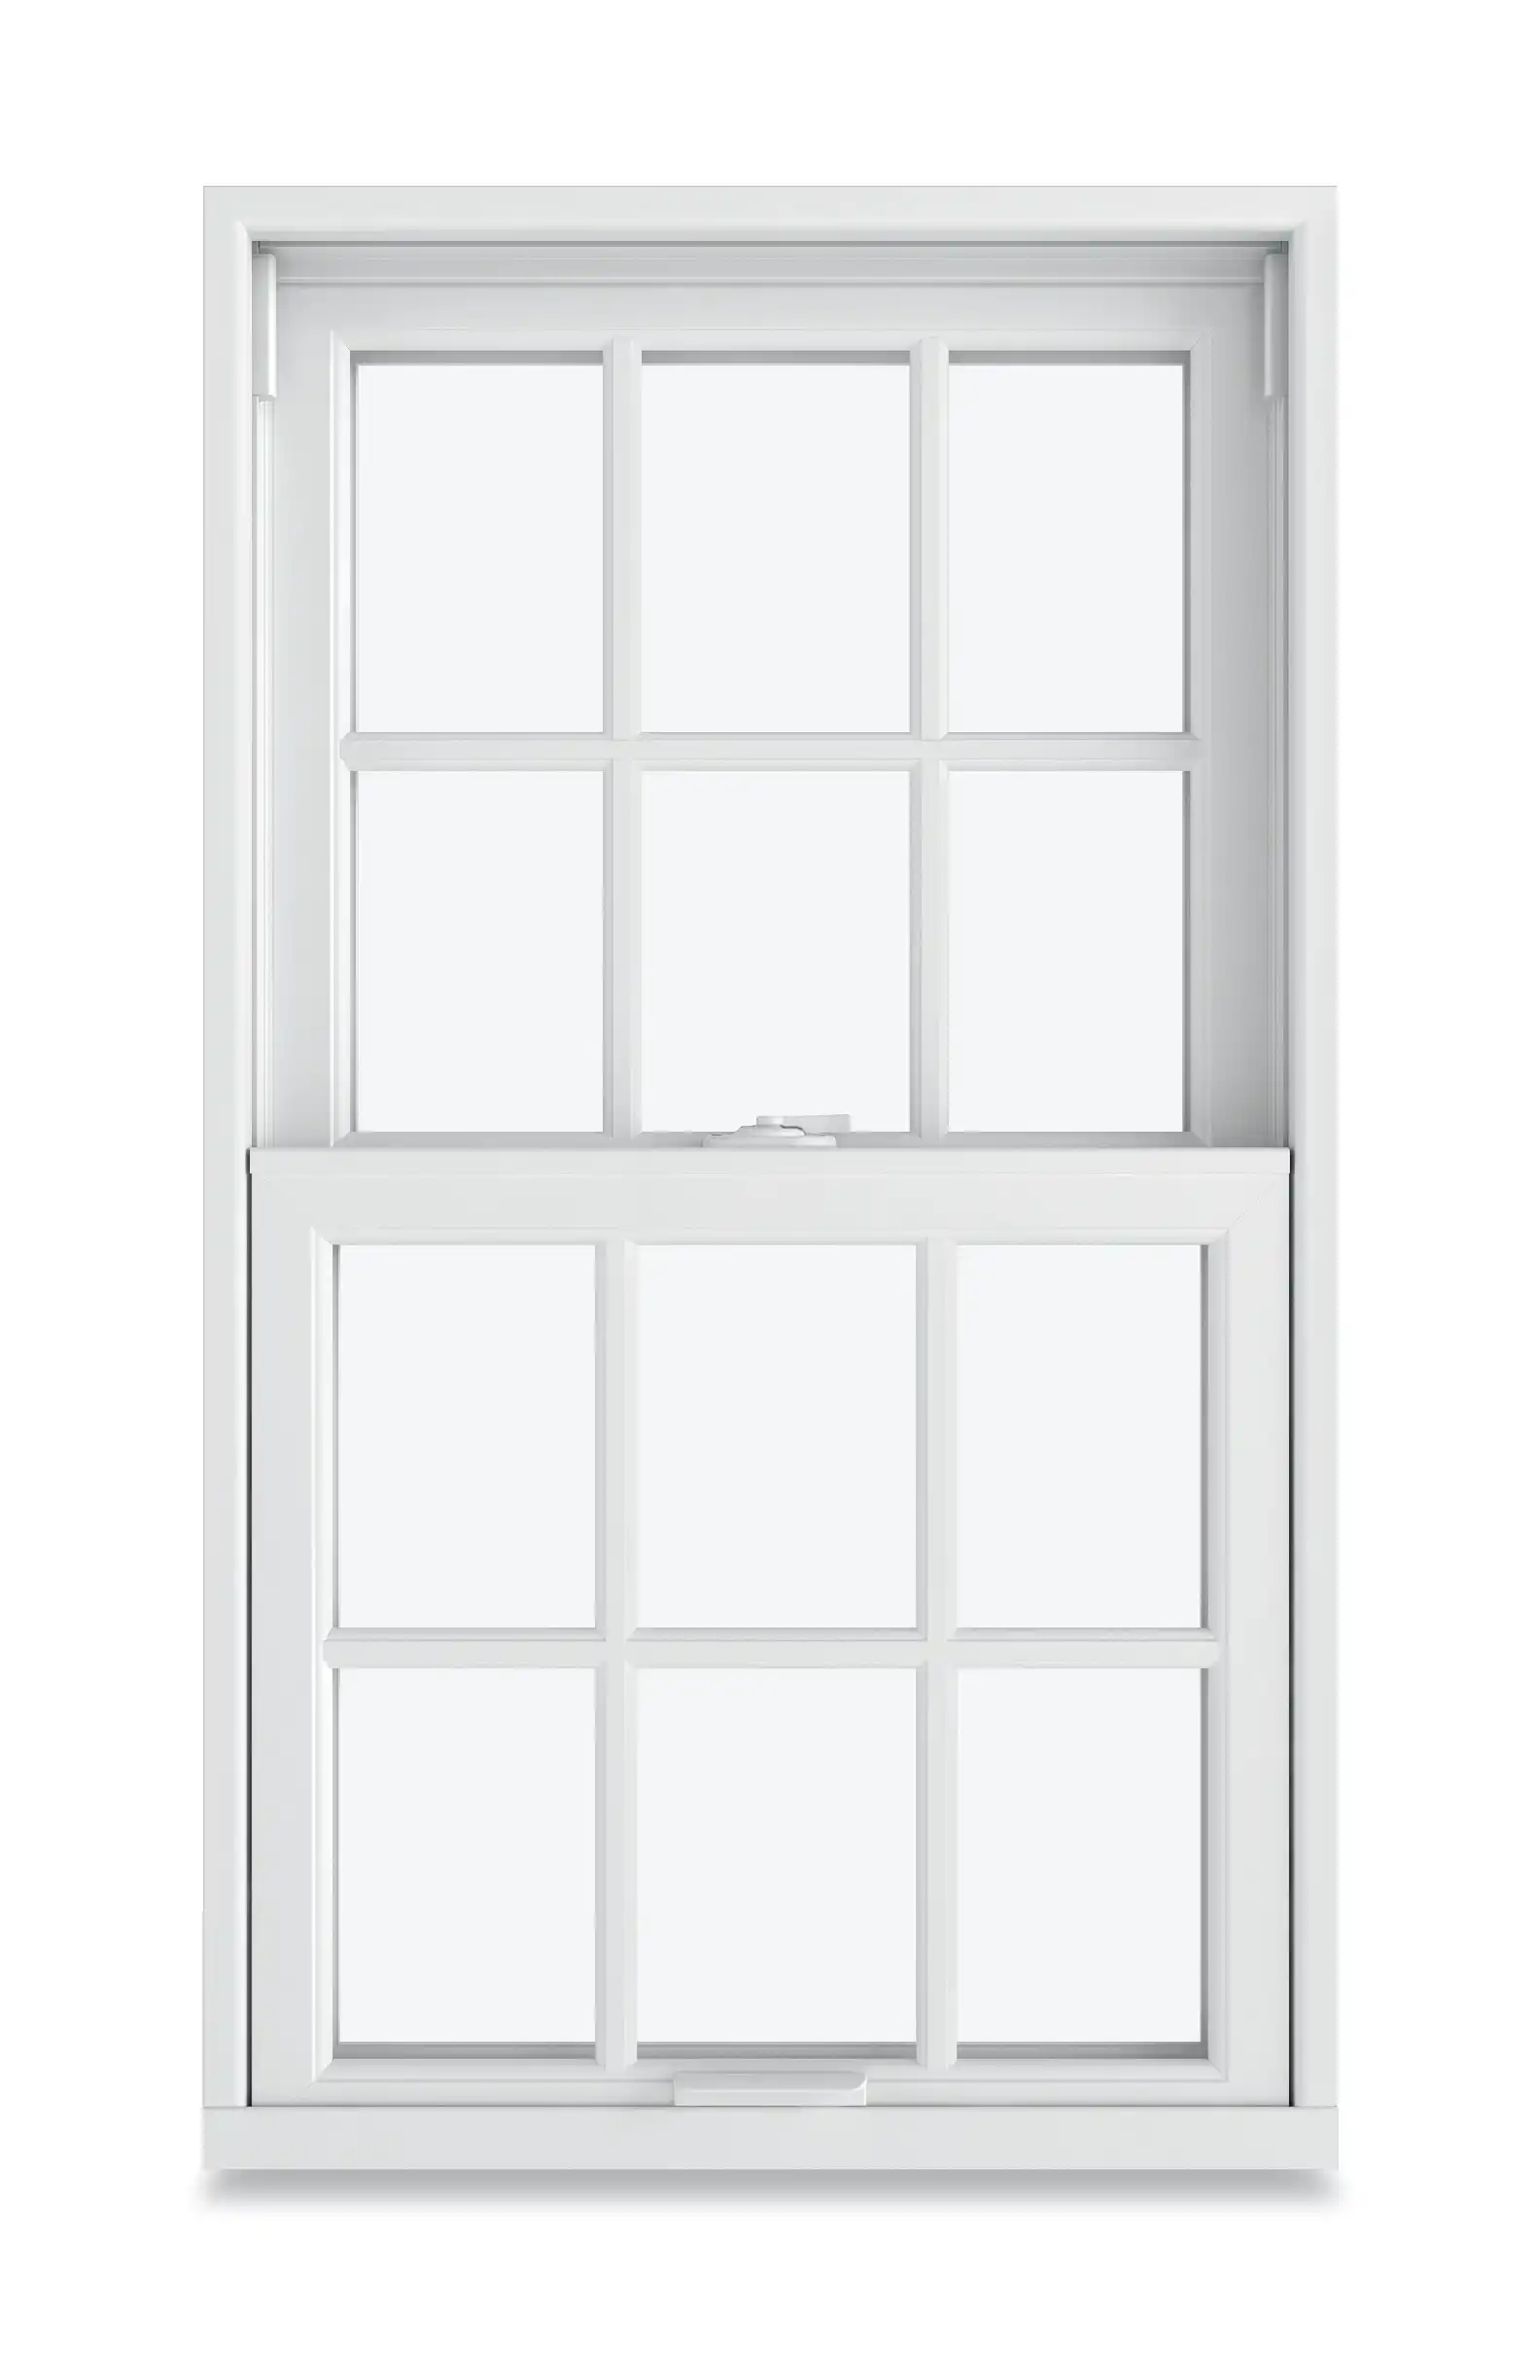 A white Marvin Replacement Double Hung window with a standard divided lite pattern.